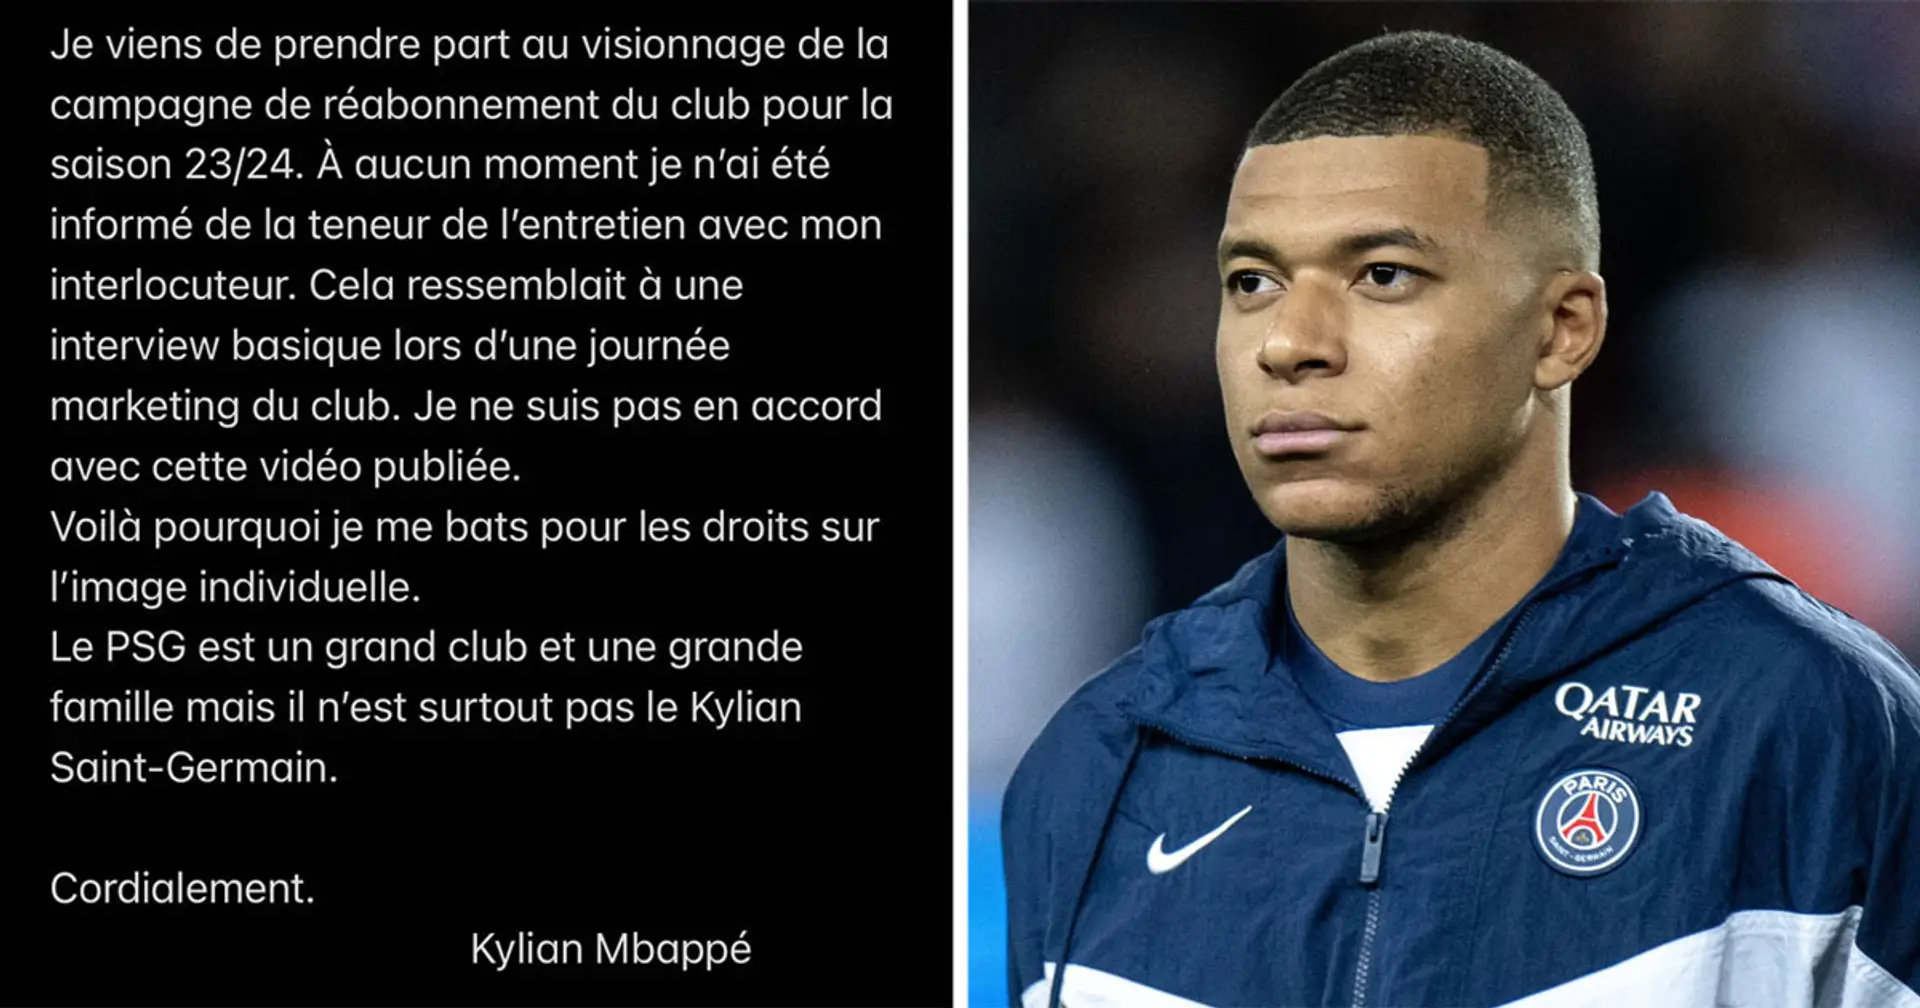 'It's not Kylian Saint-Germain': new Mbappe-PSG drama breaks out, Madrid watching passively